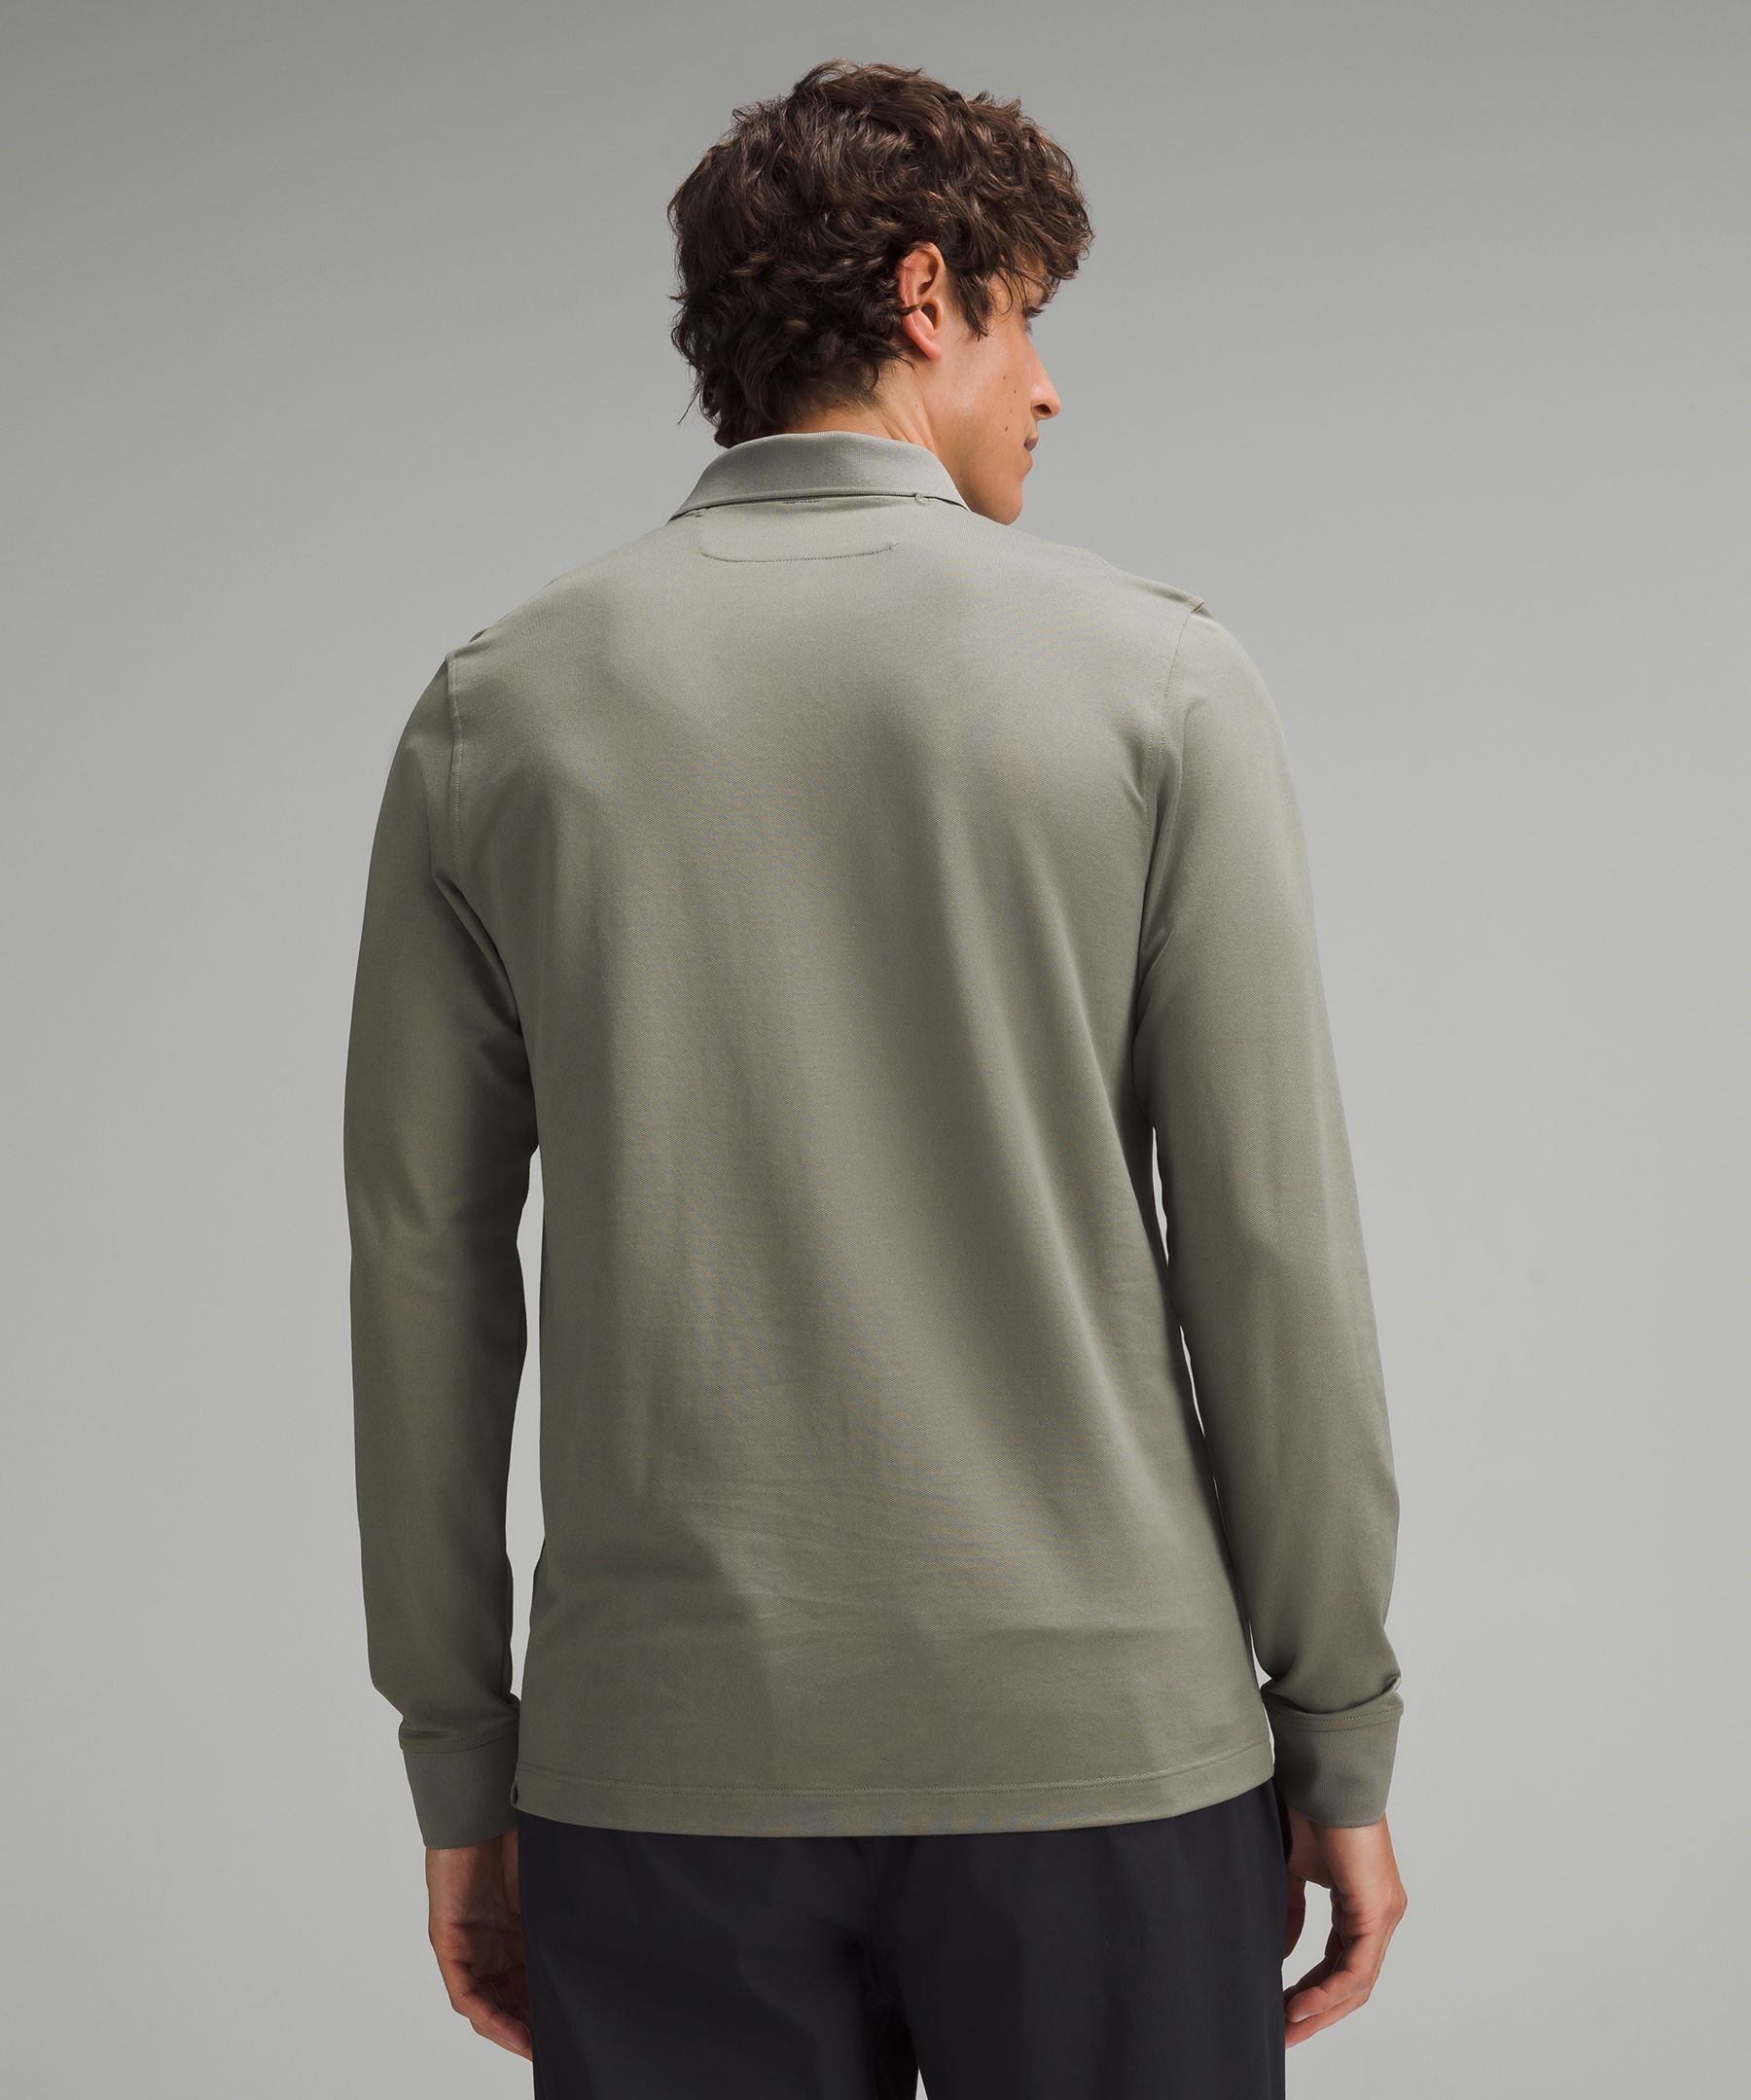 lululemon athletica Pique Oversized-fit Long-sleeve Shirt in Natural